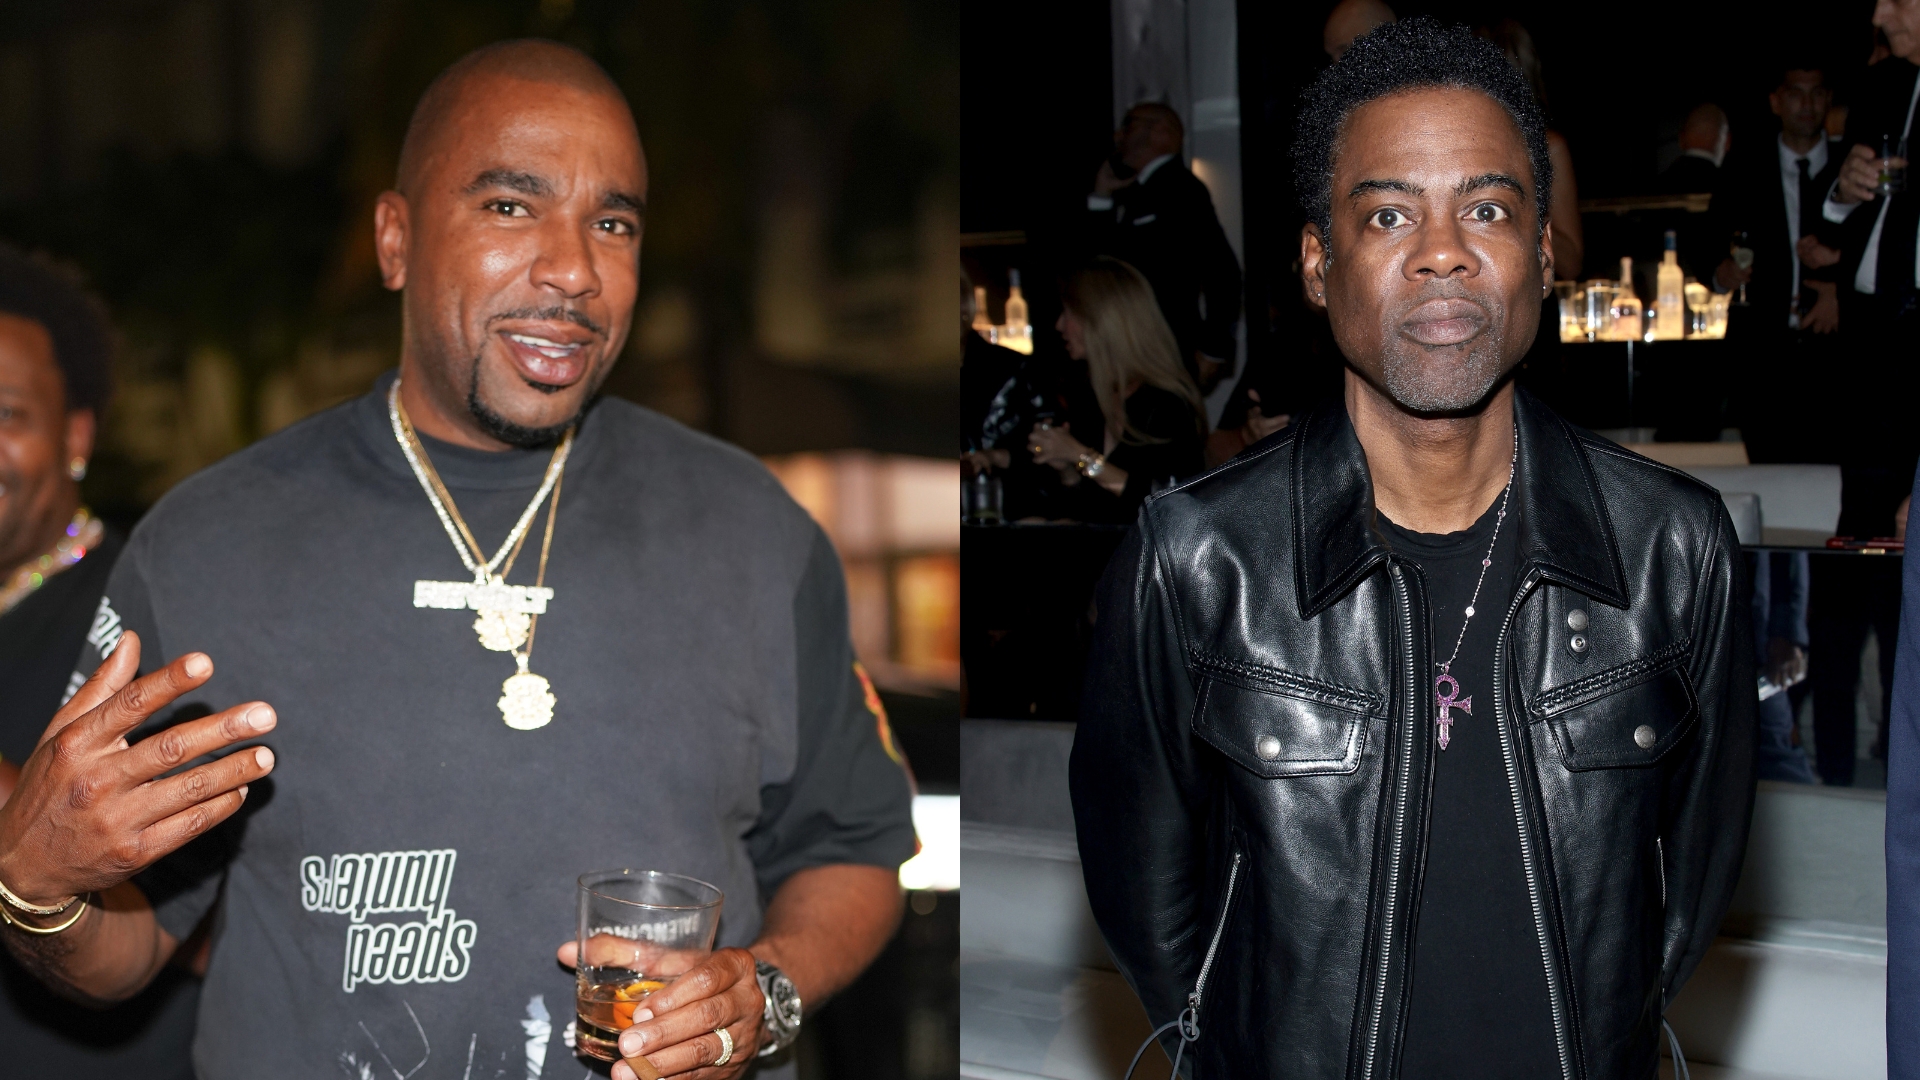 N.O.R.E Claims Chris Rock Wants To Do His First Post-Slap Interview With Him